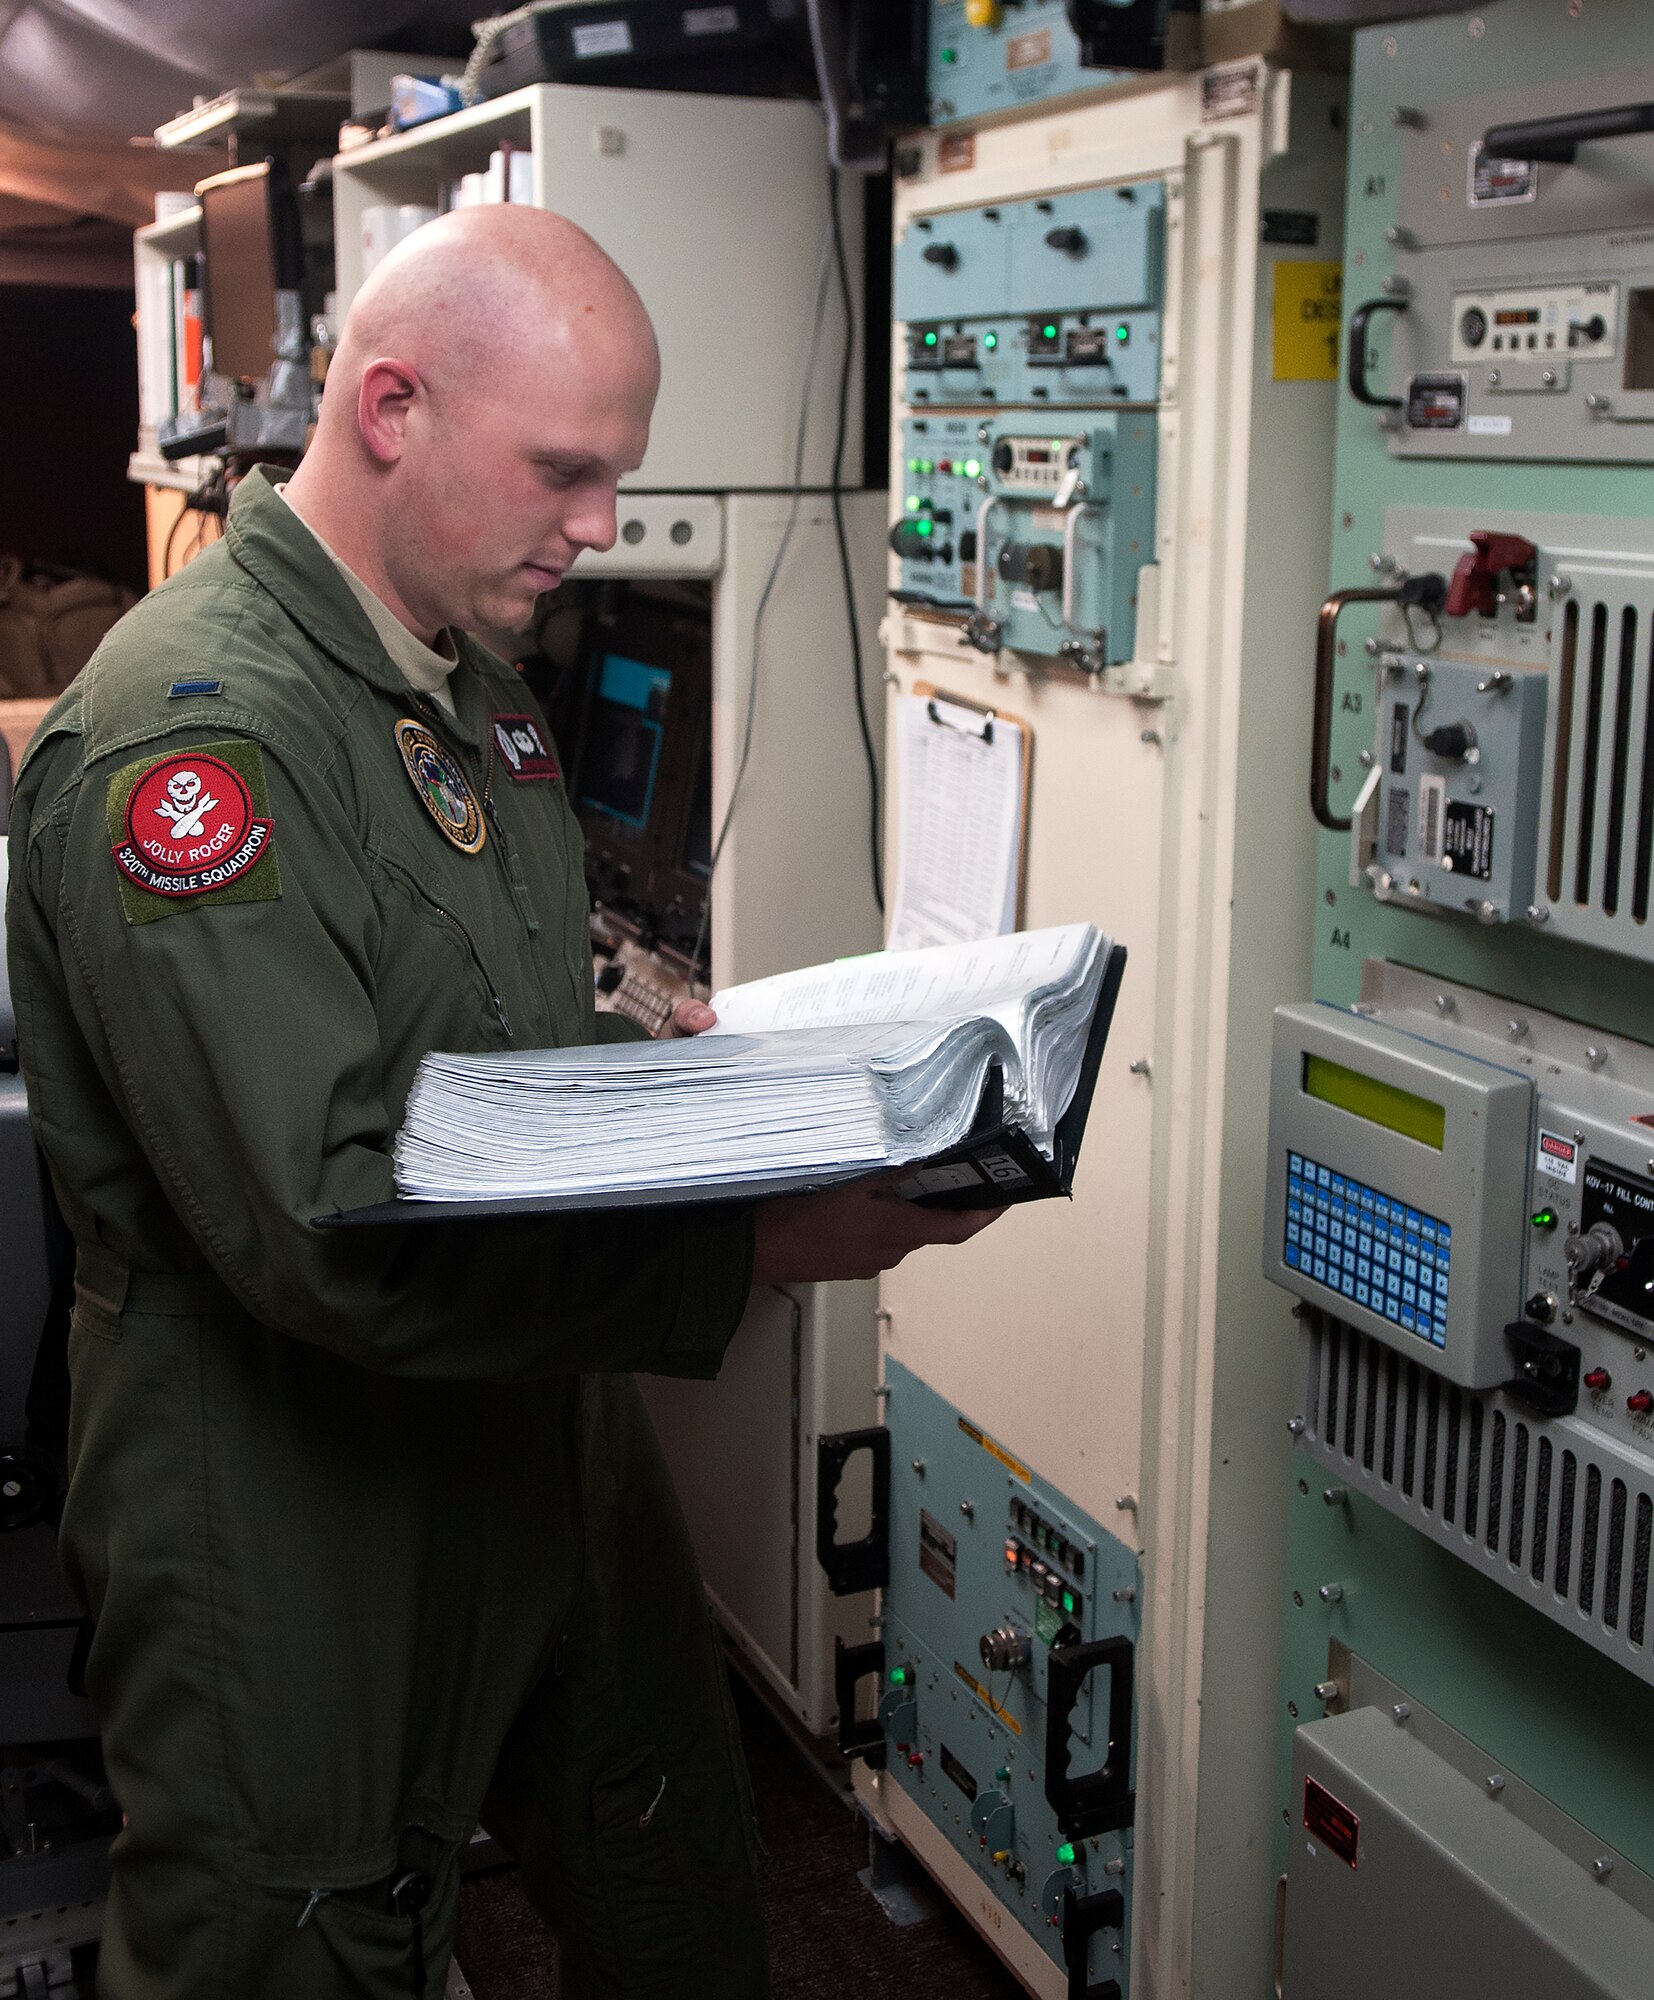 1st Lt. Jonathon Powell, 320th Missile Squadron missile combat crew member, reads from a technical order while checking equipment inside a launch control center Aug. 21, 2015. Technical orders help missileers perform task correctly and safely to prevent any accidents with equipment. (U.S. Air Force by Airman 1st Class Brandon Valle)